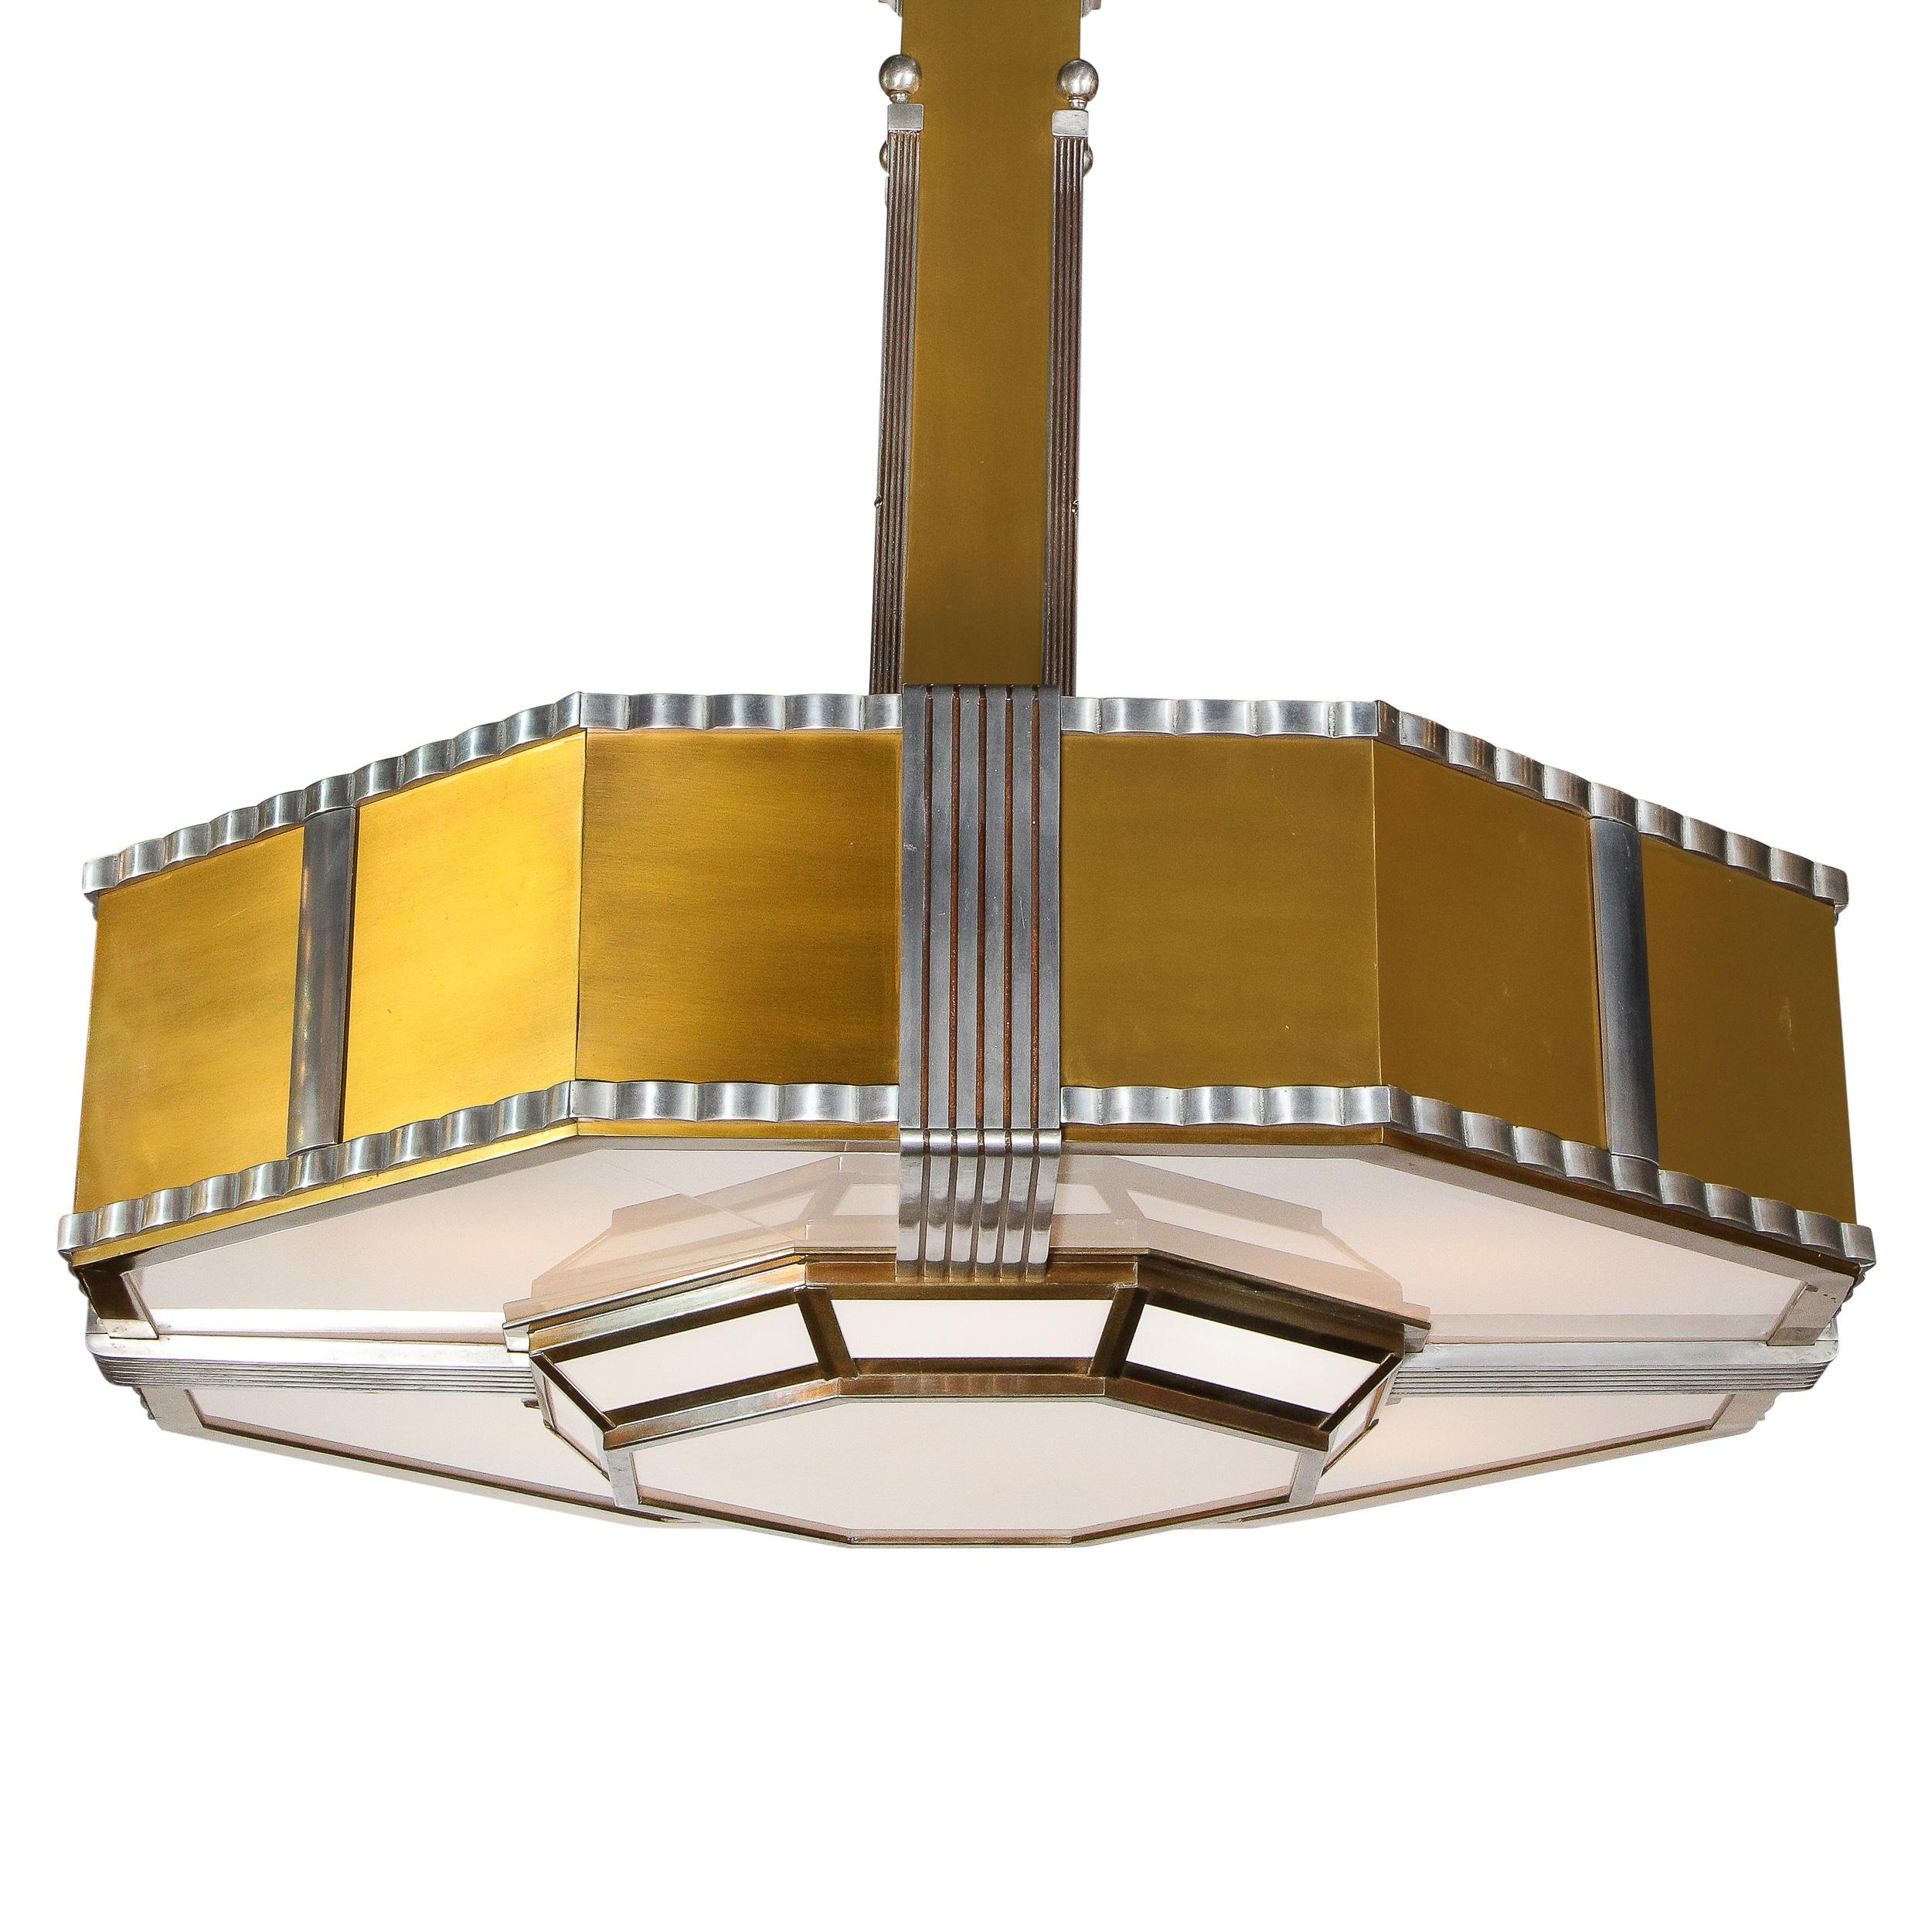 This rare and iconic Art Deco Machine Age skyscraper style chandelier was realized in America, circa 1935. The monumental scale fixture offers a two tier configuration and an octagonal form composed of brushed brass, aluminum and frosted glass. The